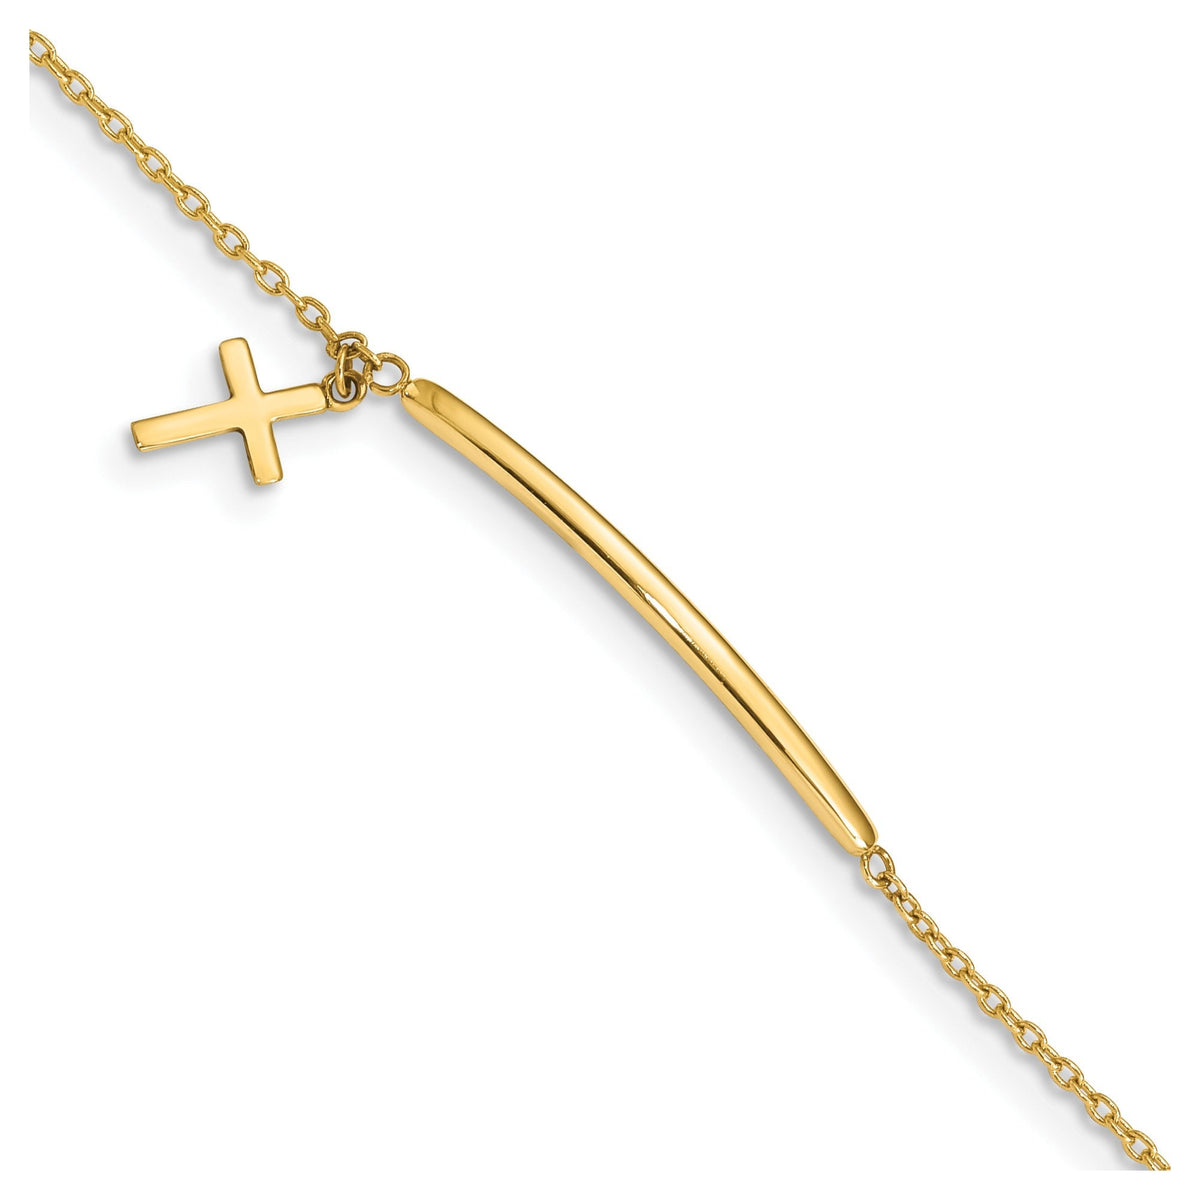 Baby to Toddler 14k Yellow Gold Personalized Cross Bracelet - 5.5 inches Baby to Toddler Size - Gift Box Included